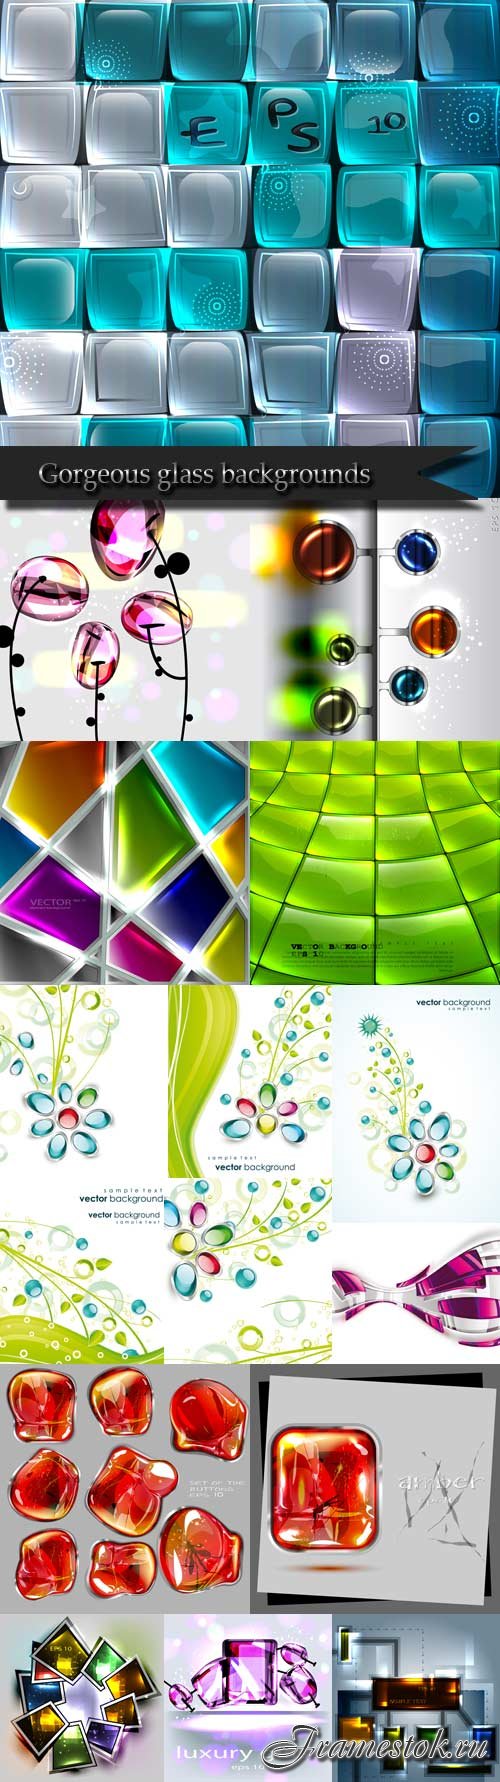 Gorgeous glass backgrounds